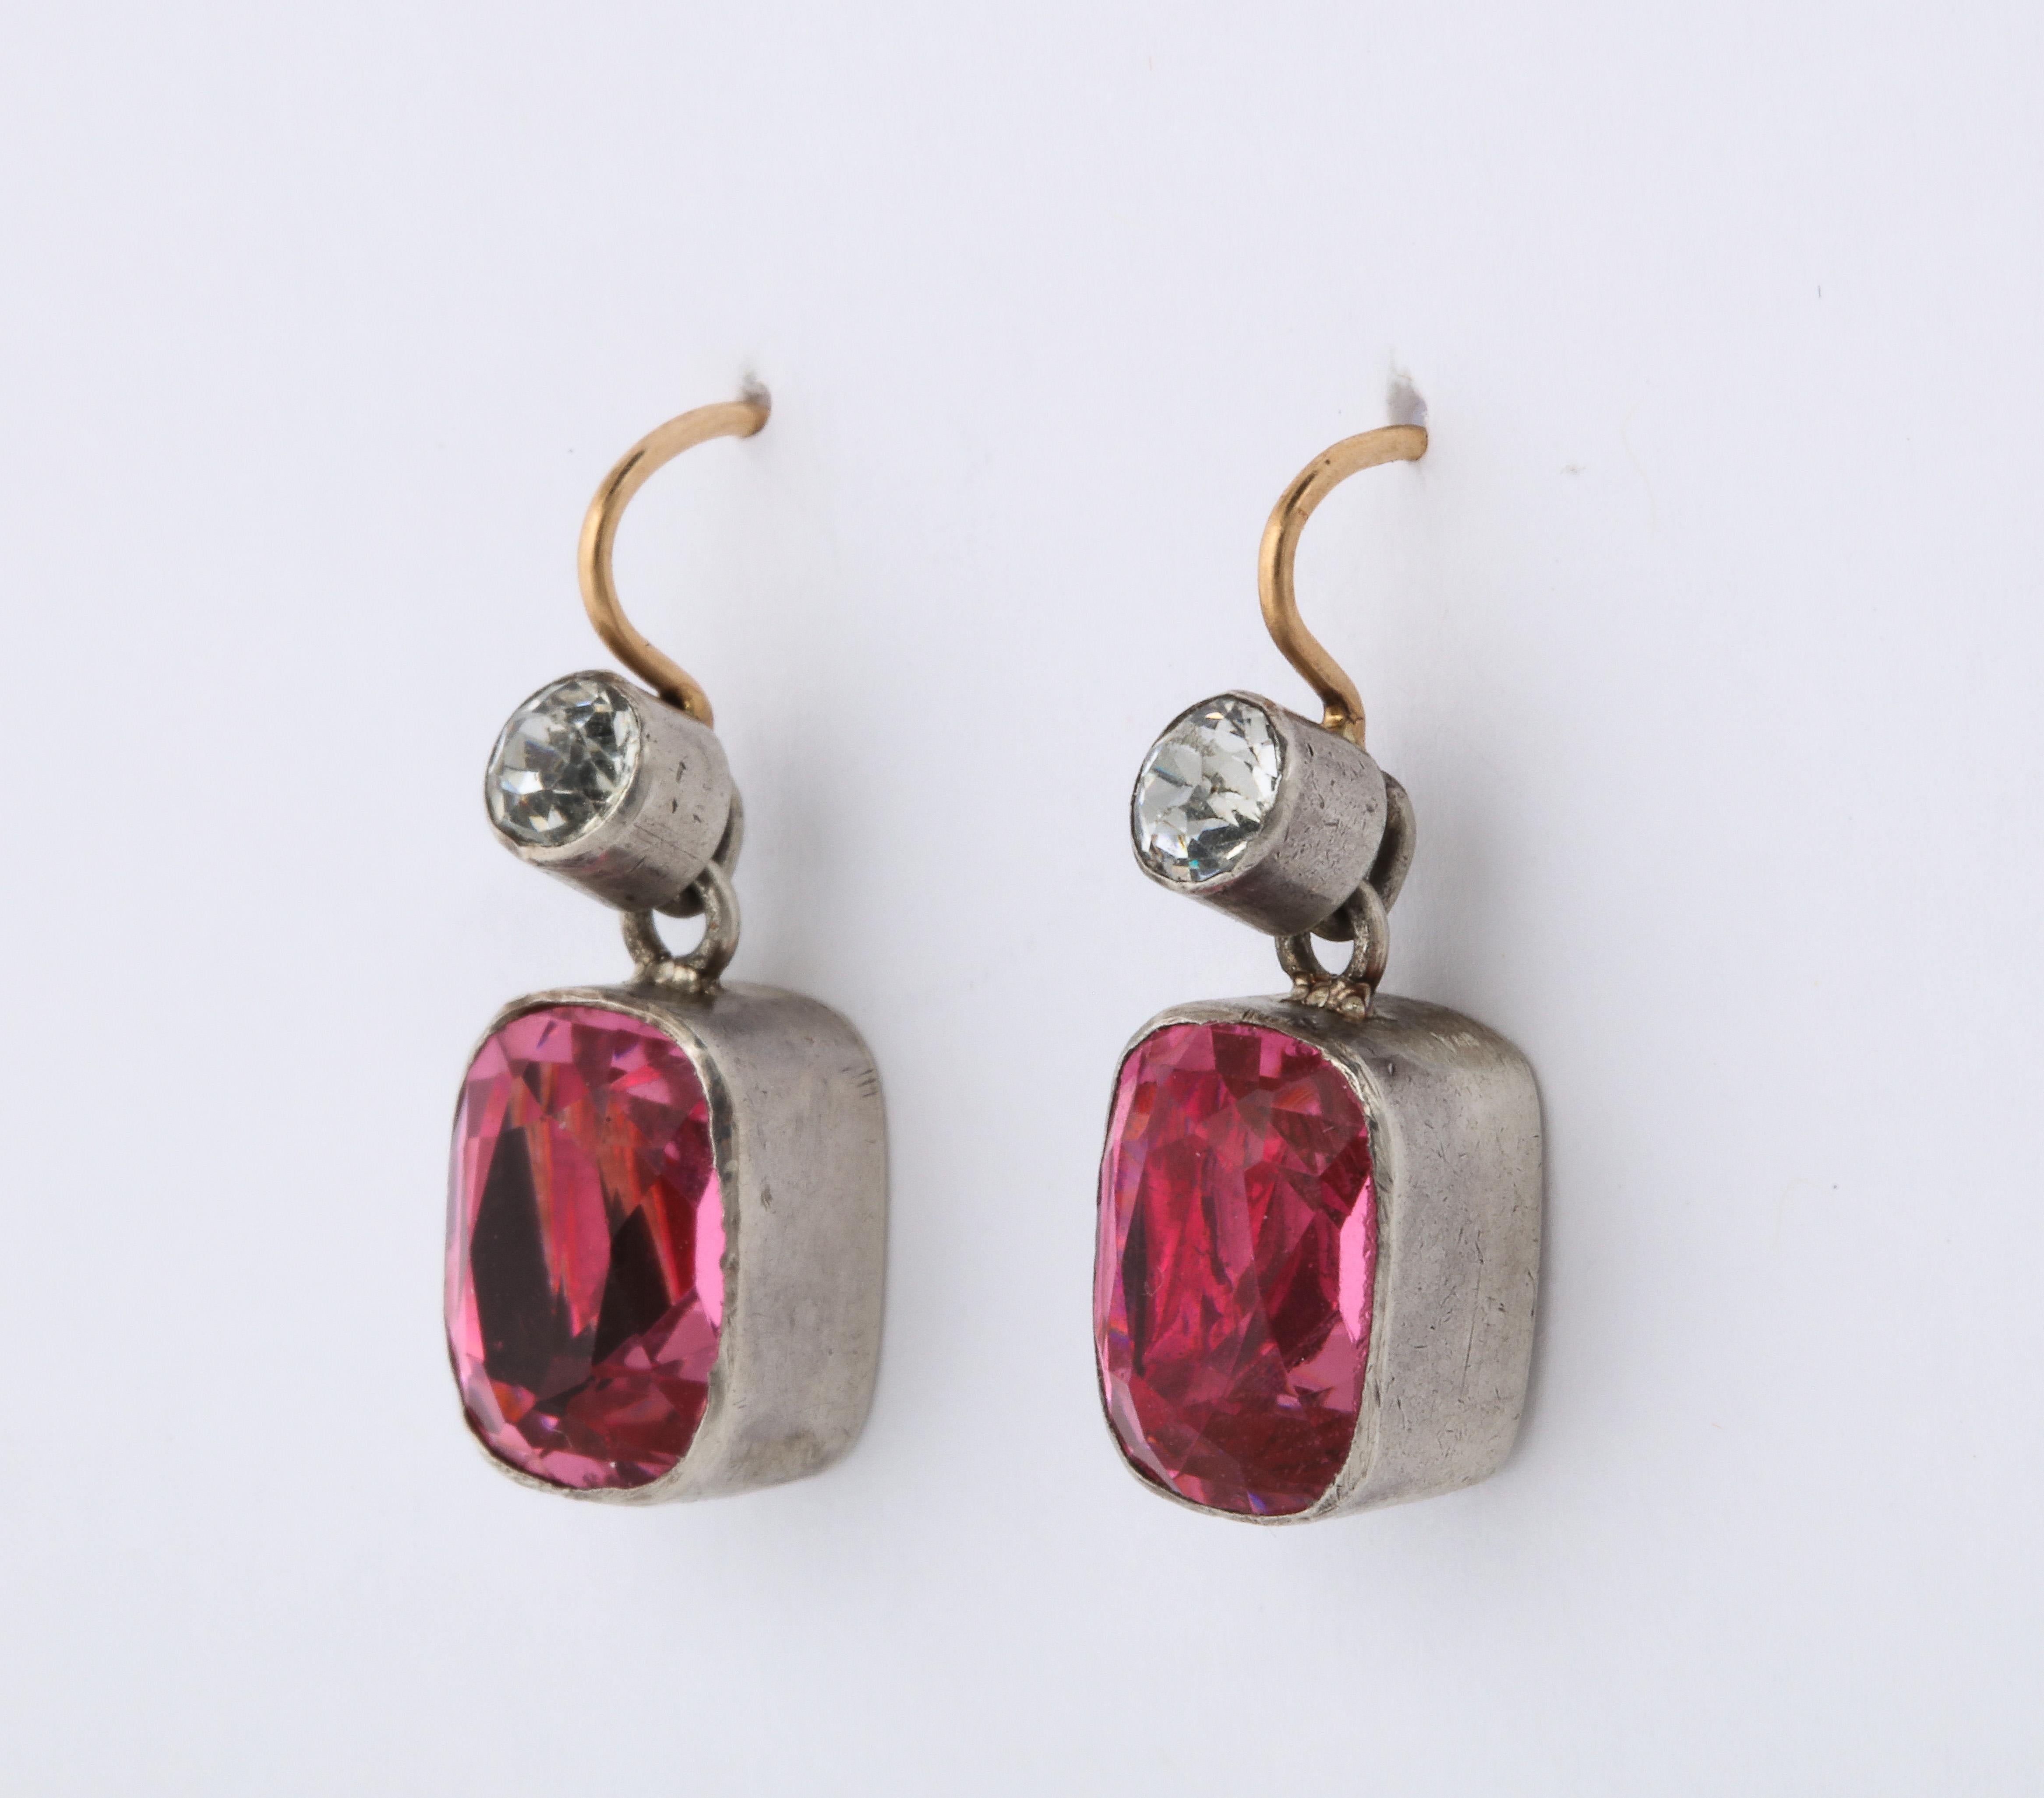  These vivid pink paste Edwardian dangle earrings will compliment every skin tone. The deep silver collet is closed backed and foiled to enrich the pink and white round stones. They were originally from an Edwardian necklace to which we have added